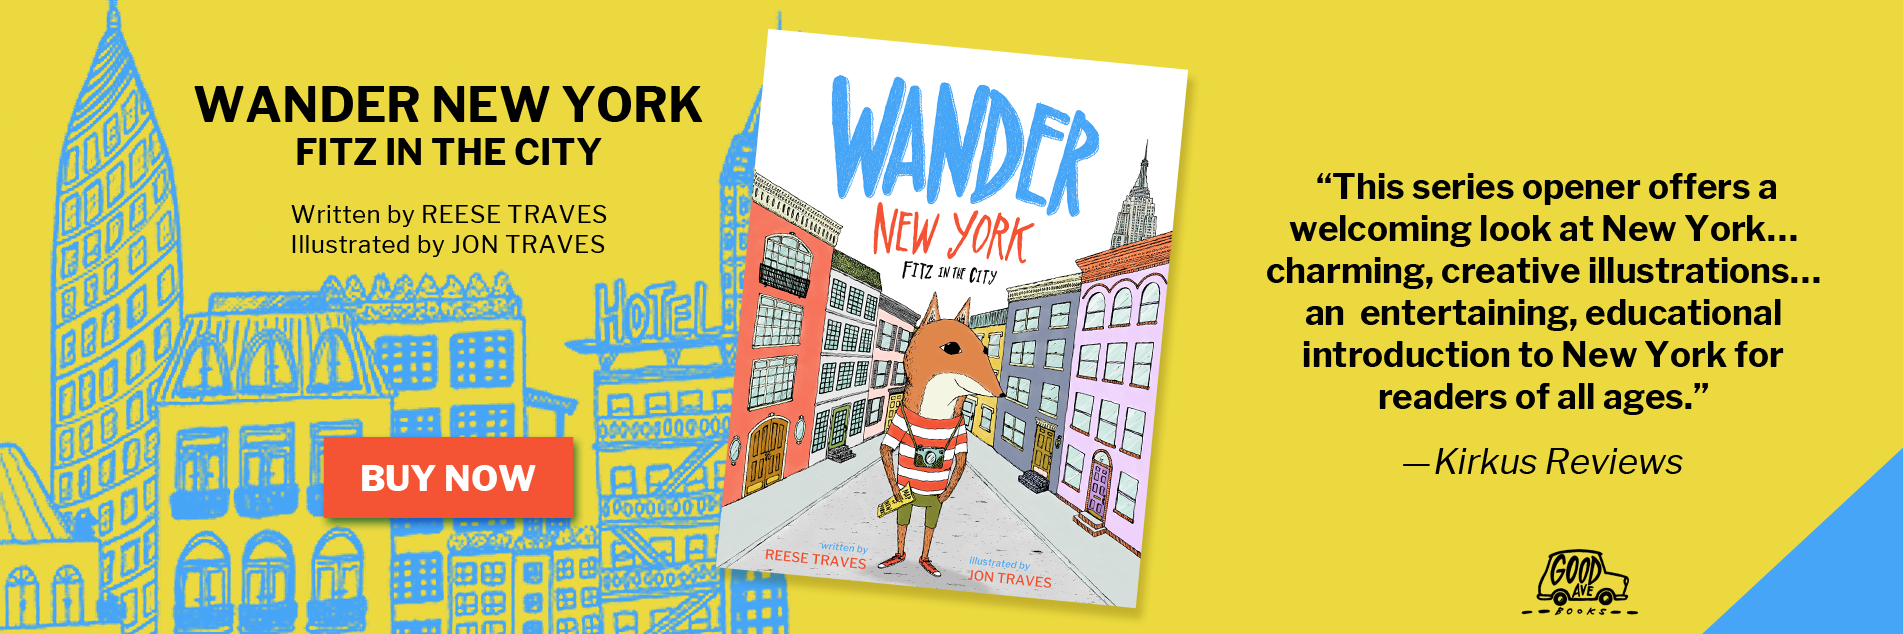 Jon Traves - Picture Book Illustrator - Buy Wander New York Book Now